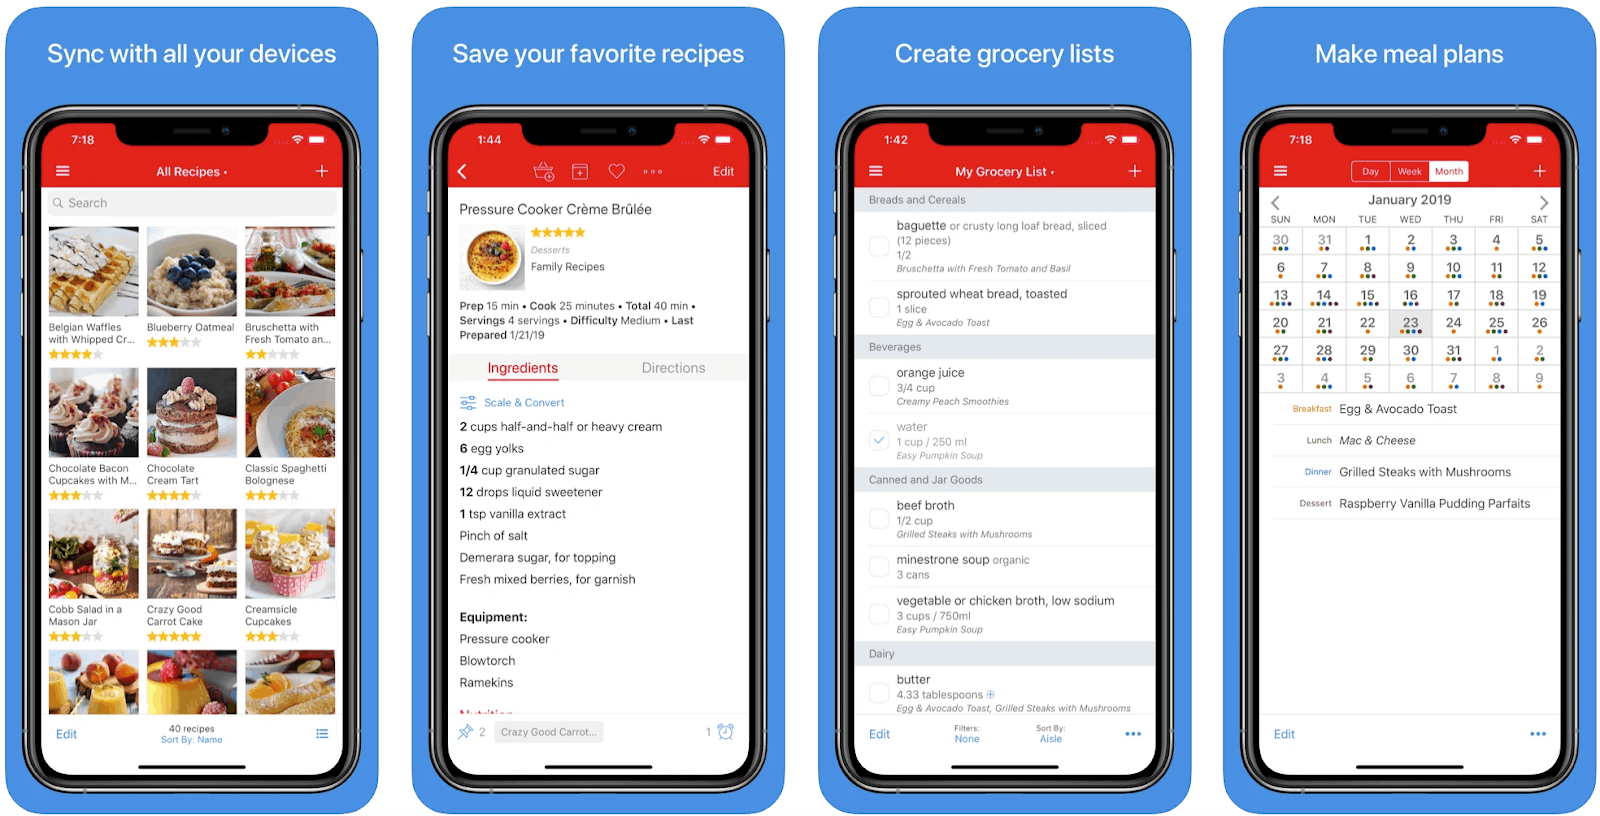 Recipe Apps - Discover Apps That Will Help Users Cook Better